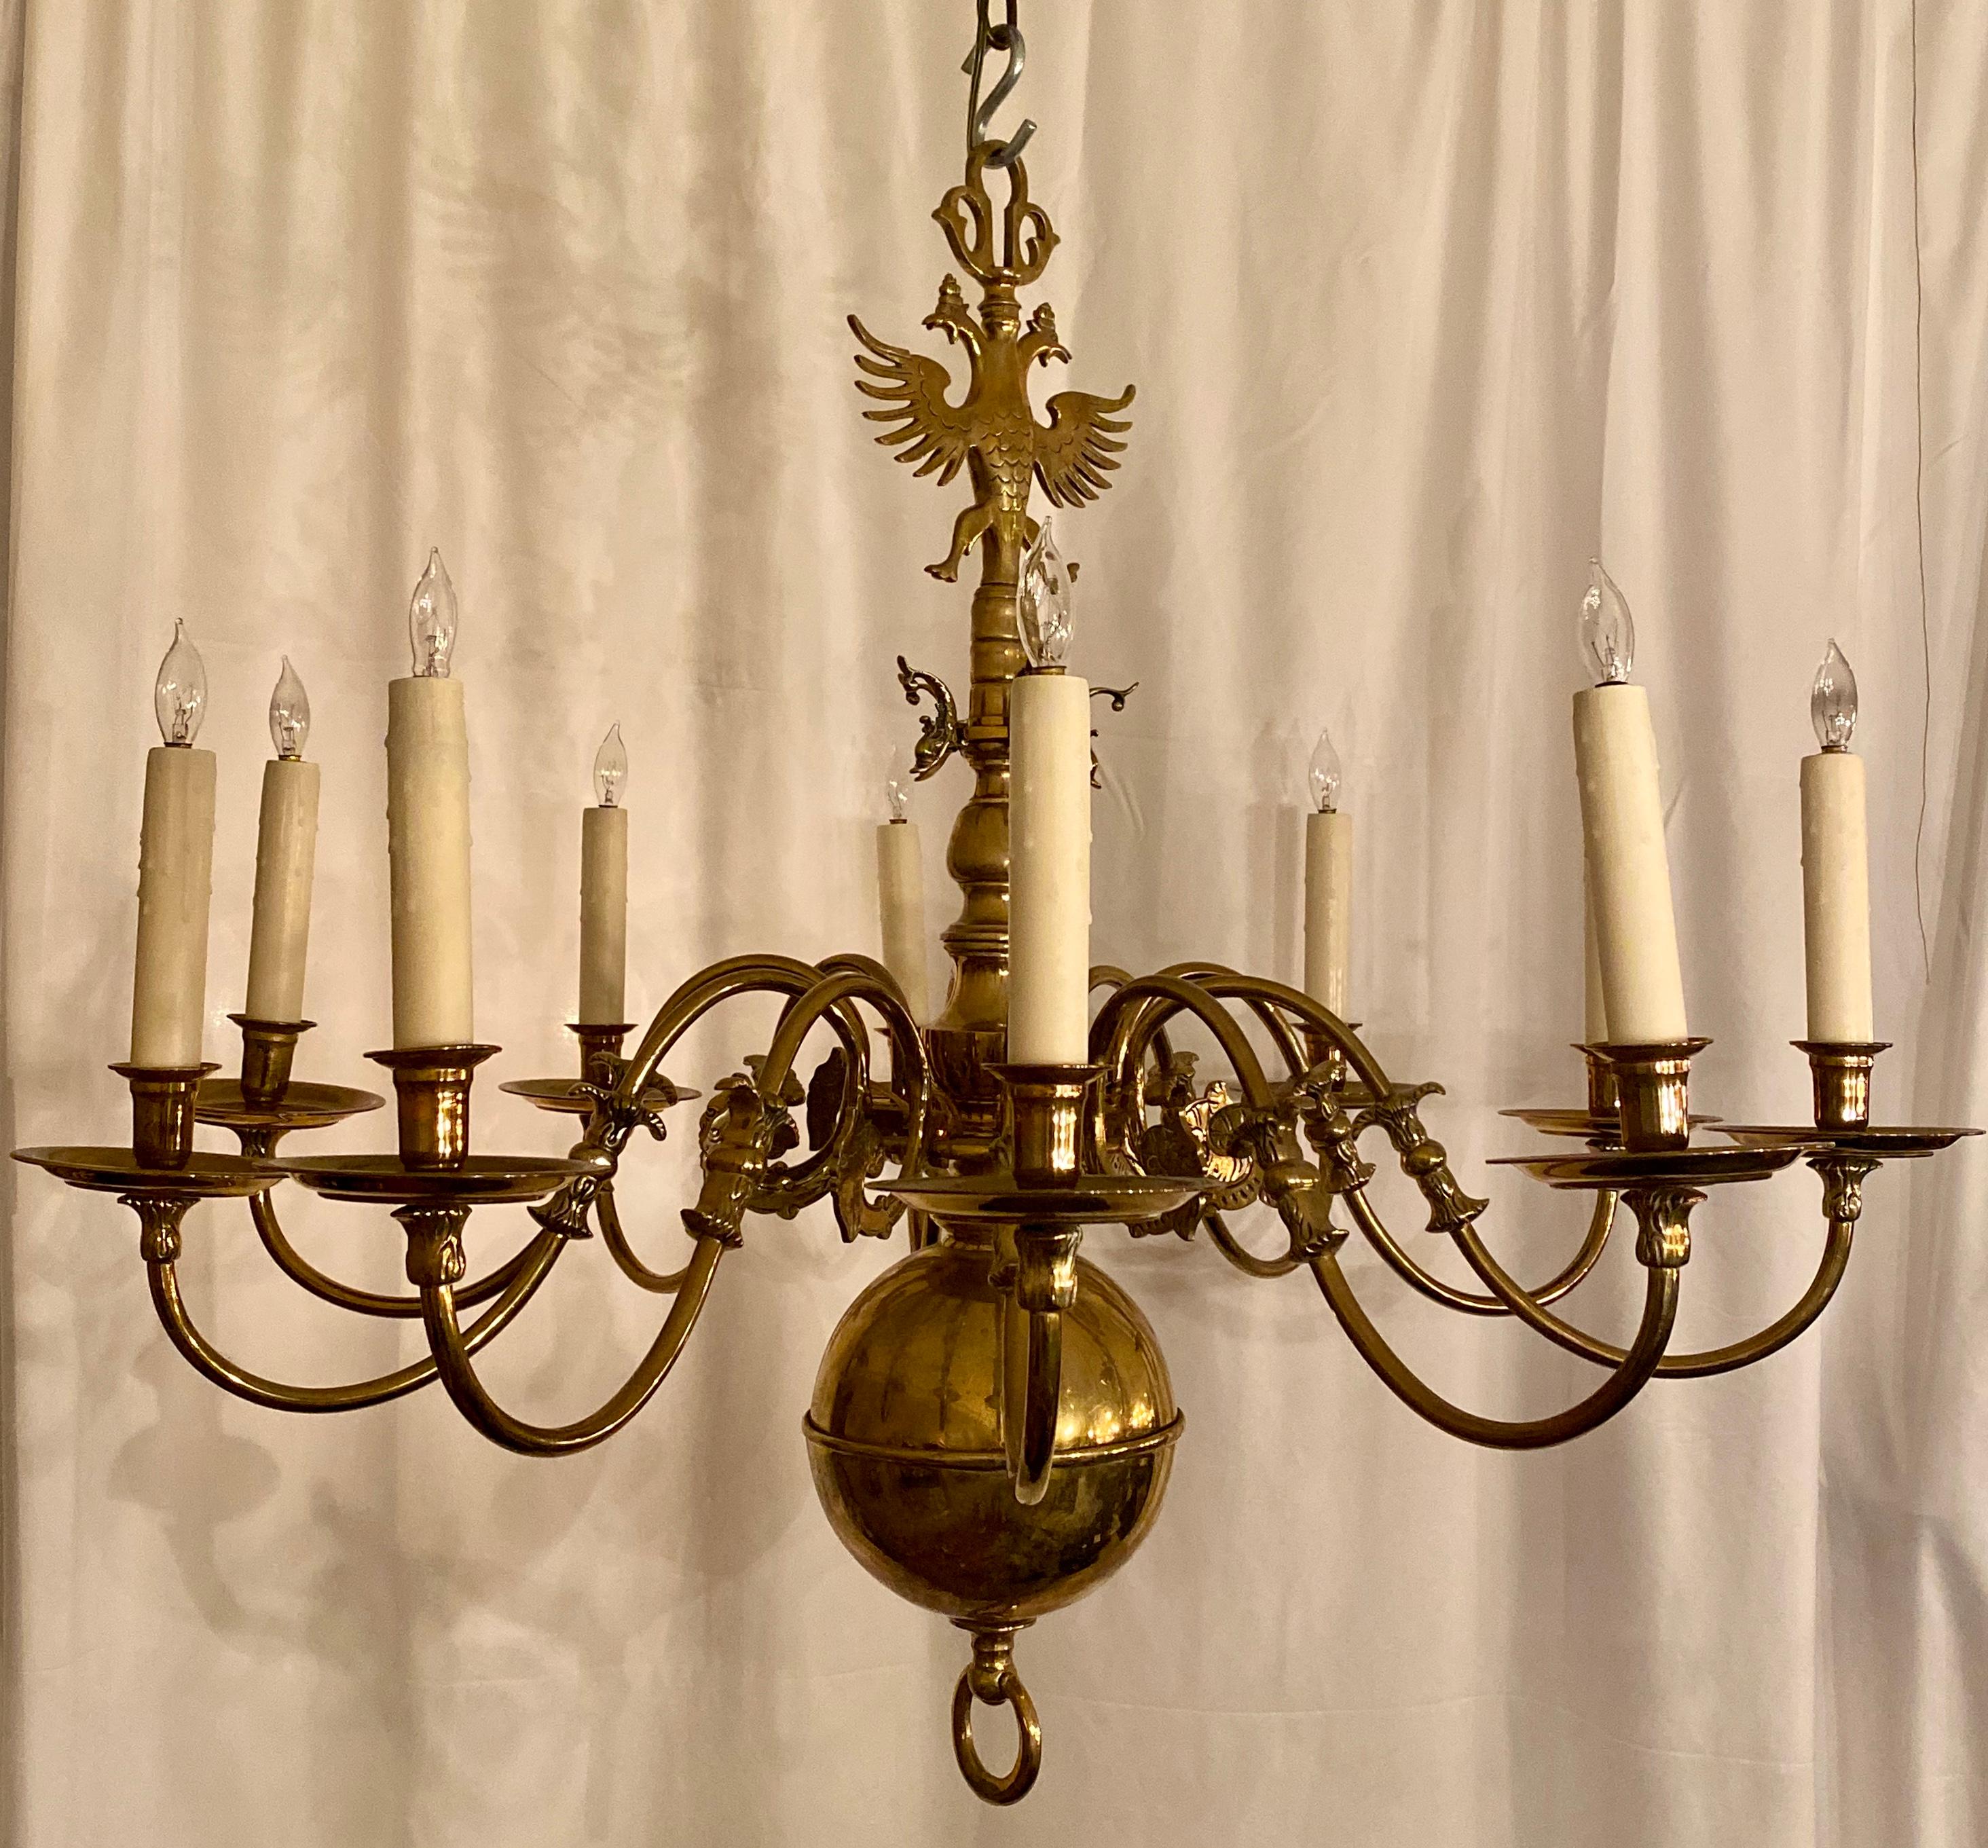 This handsome fixture could fit well in a traditional or a more contemporary home setting.
 